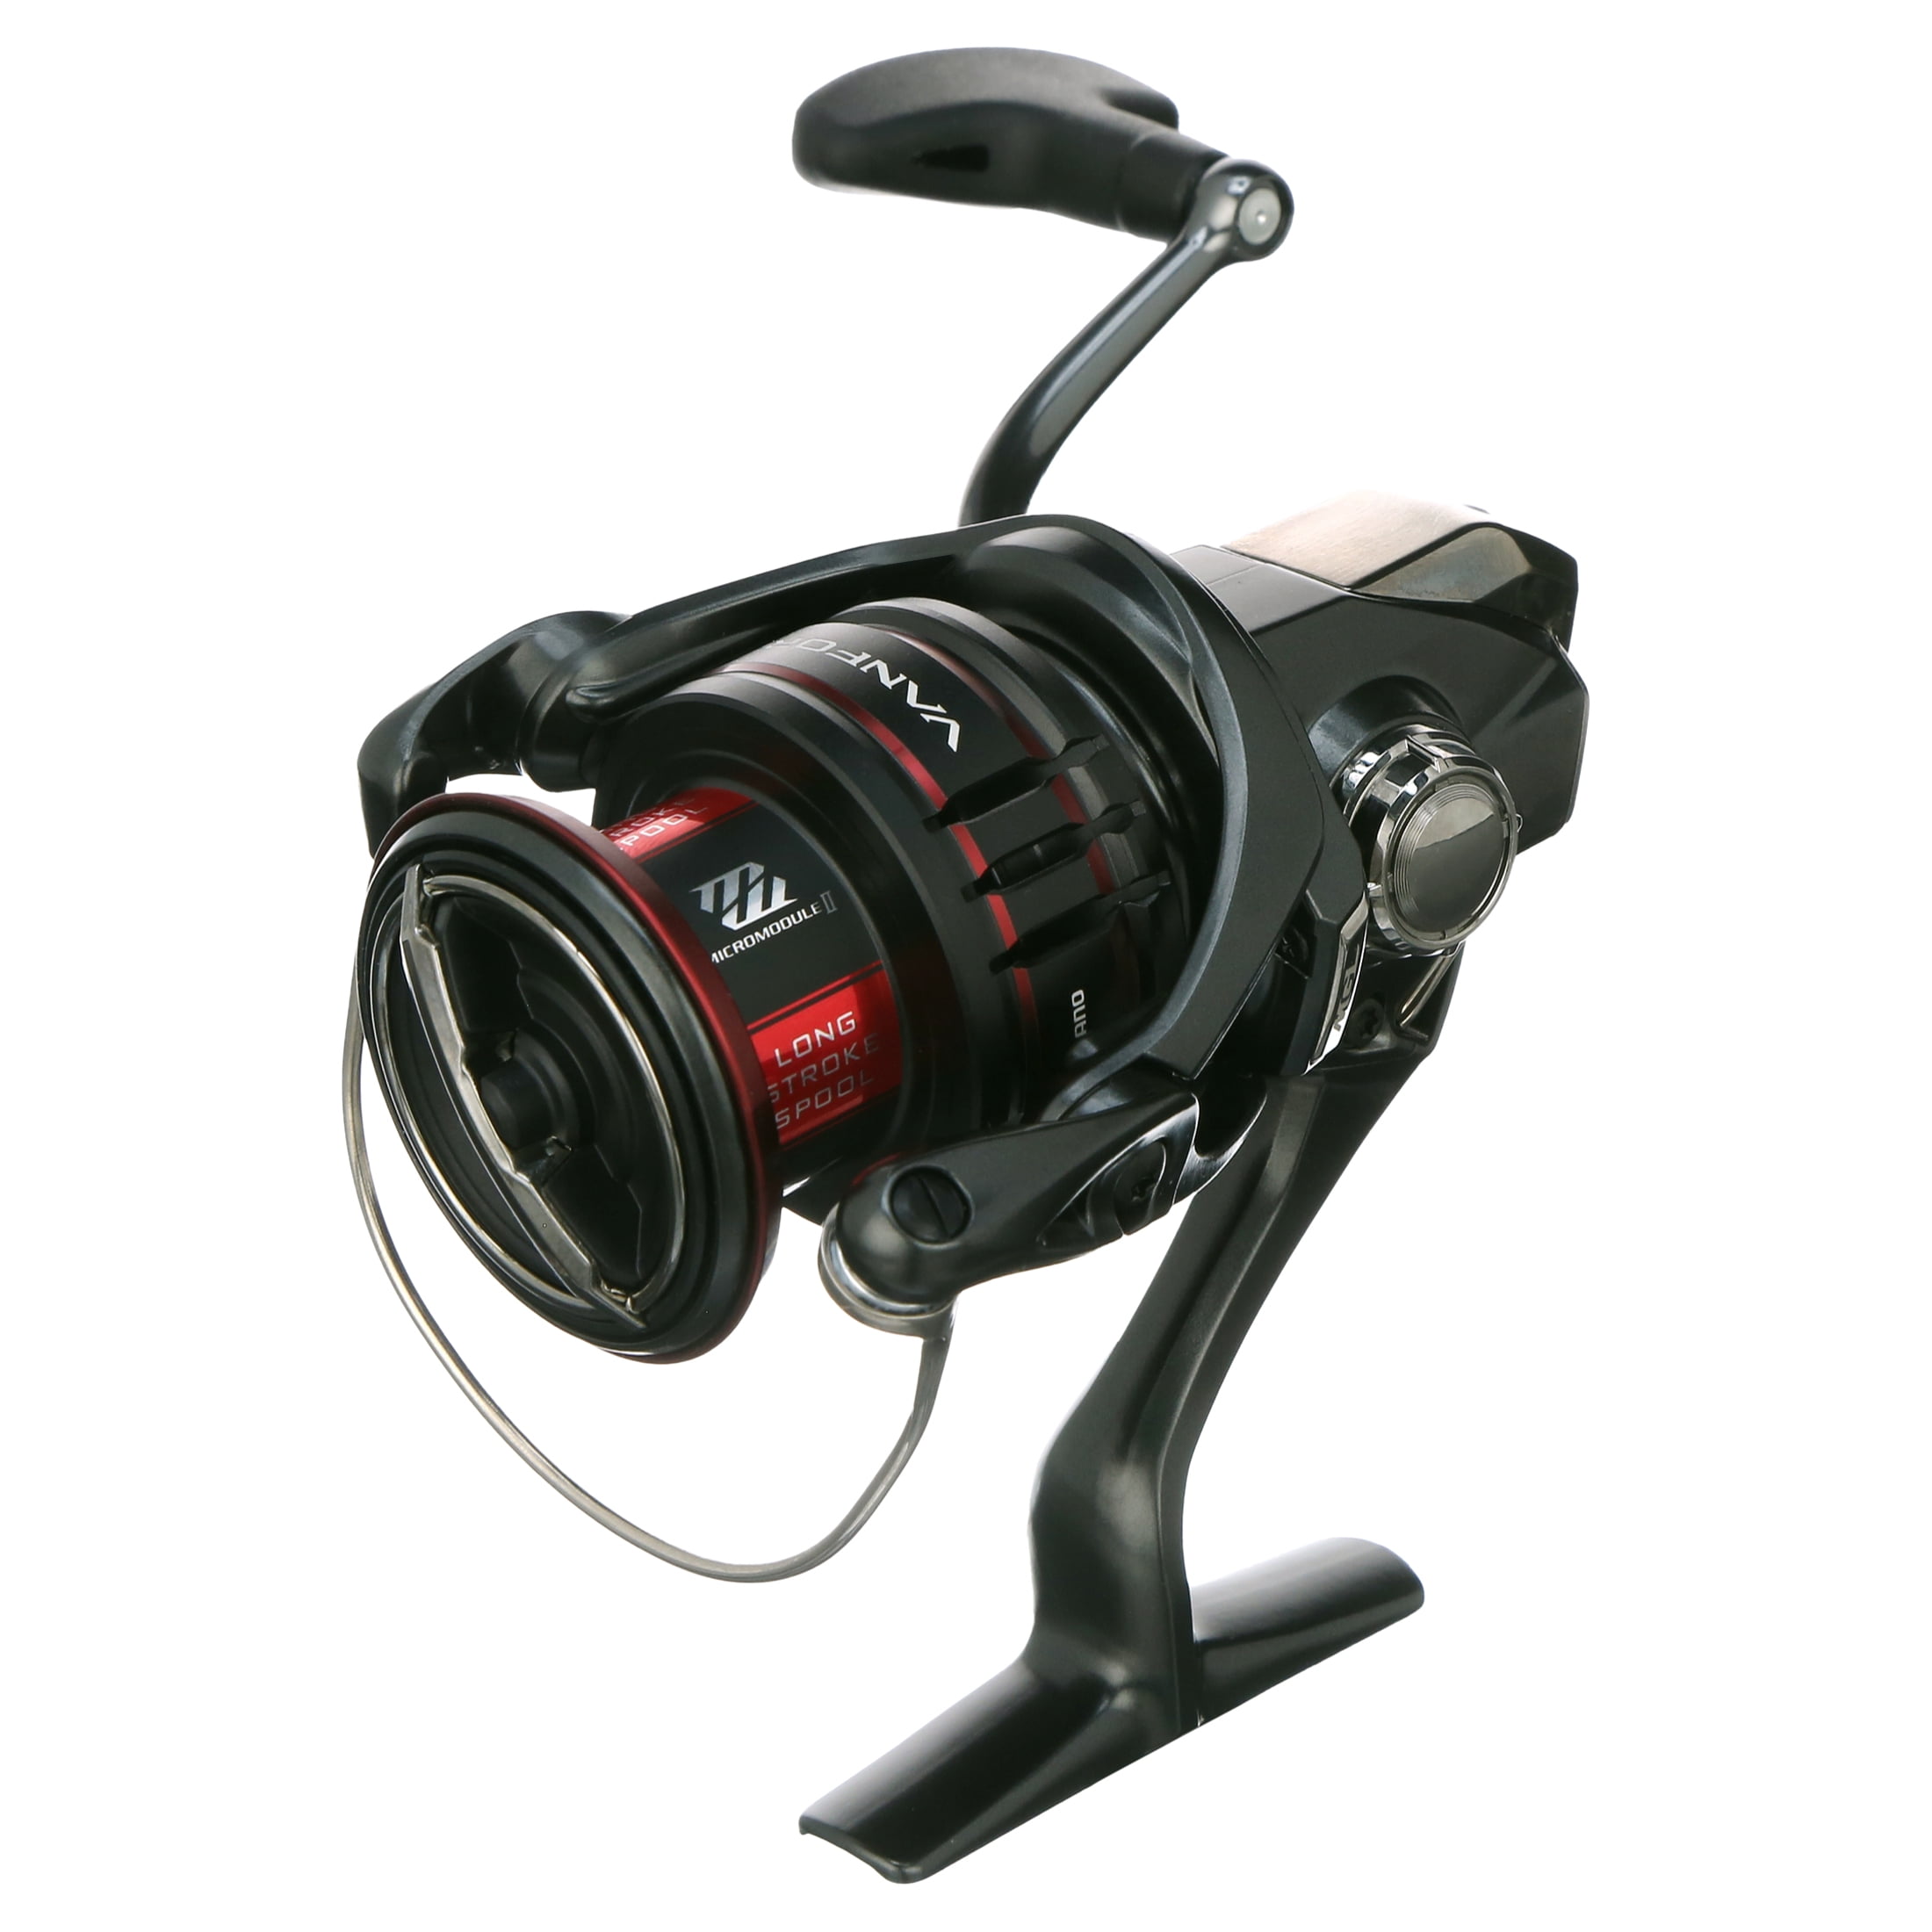  Shimano PC-031L Size M Spinning Reel Cover Reel Size 3000-5000  Black 785800 : Sports & Outdoors